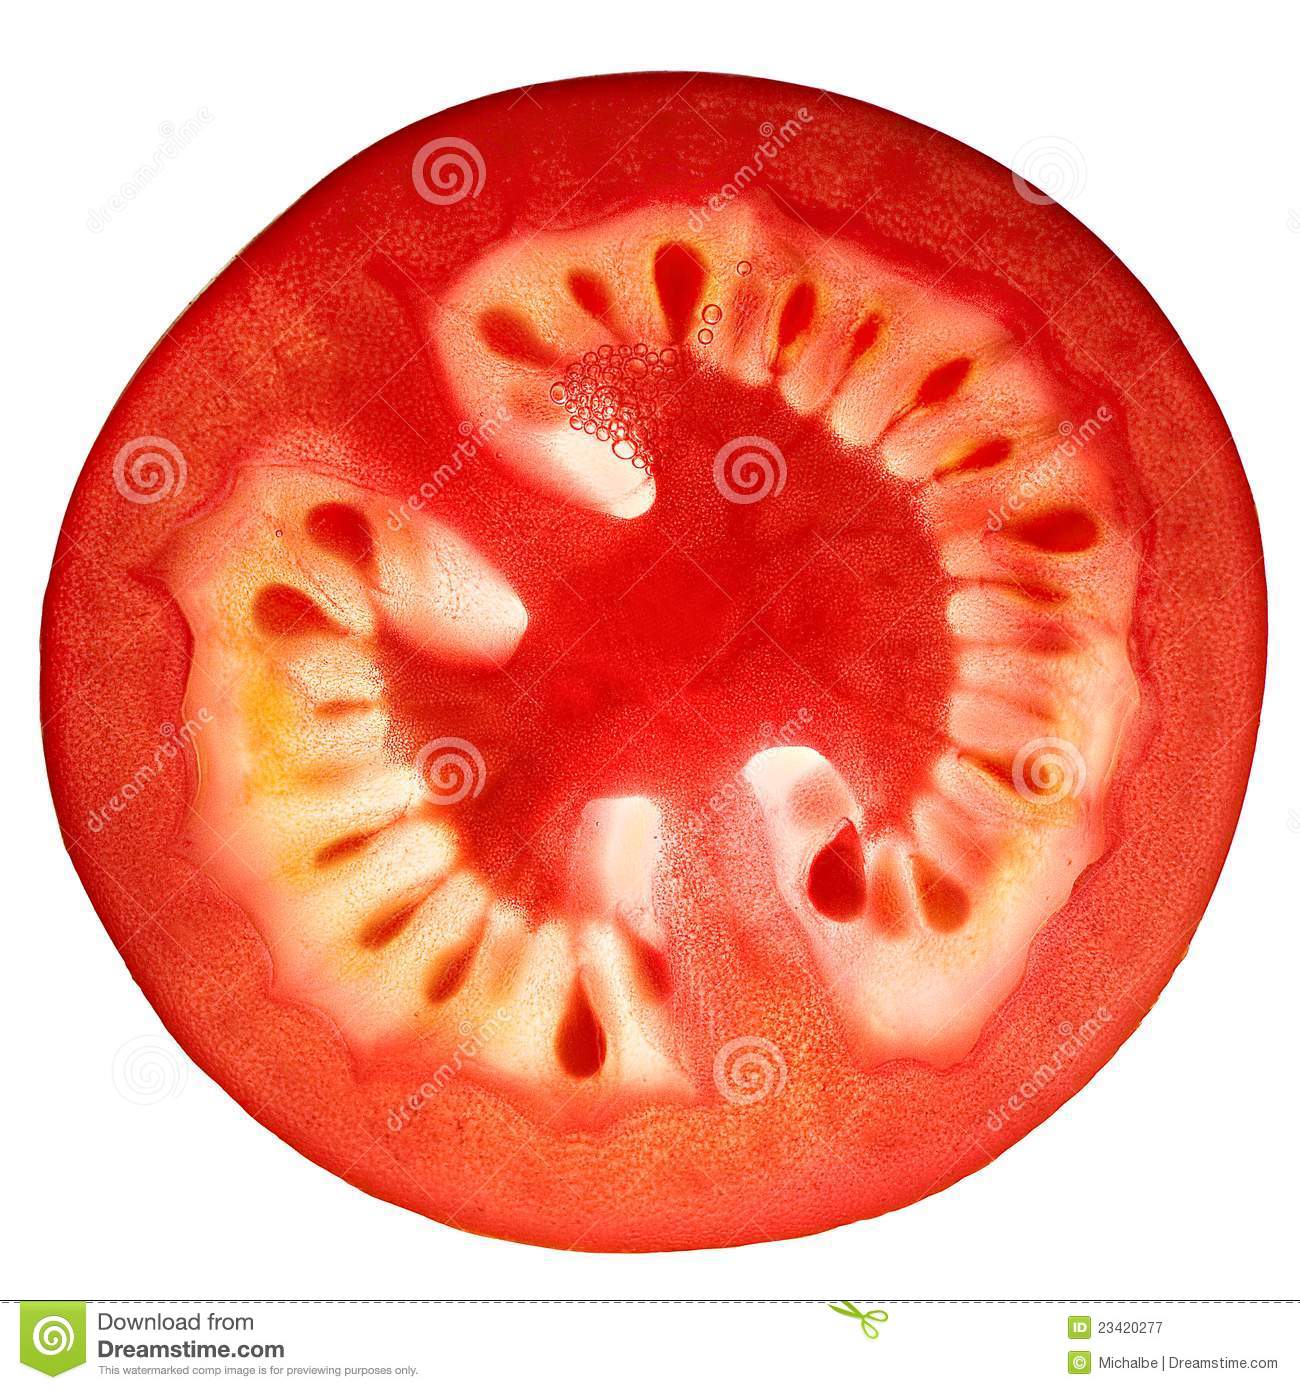 Pickle Slice Clipart Tomato Slice Isolated On White